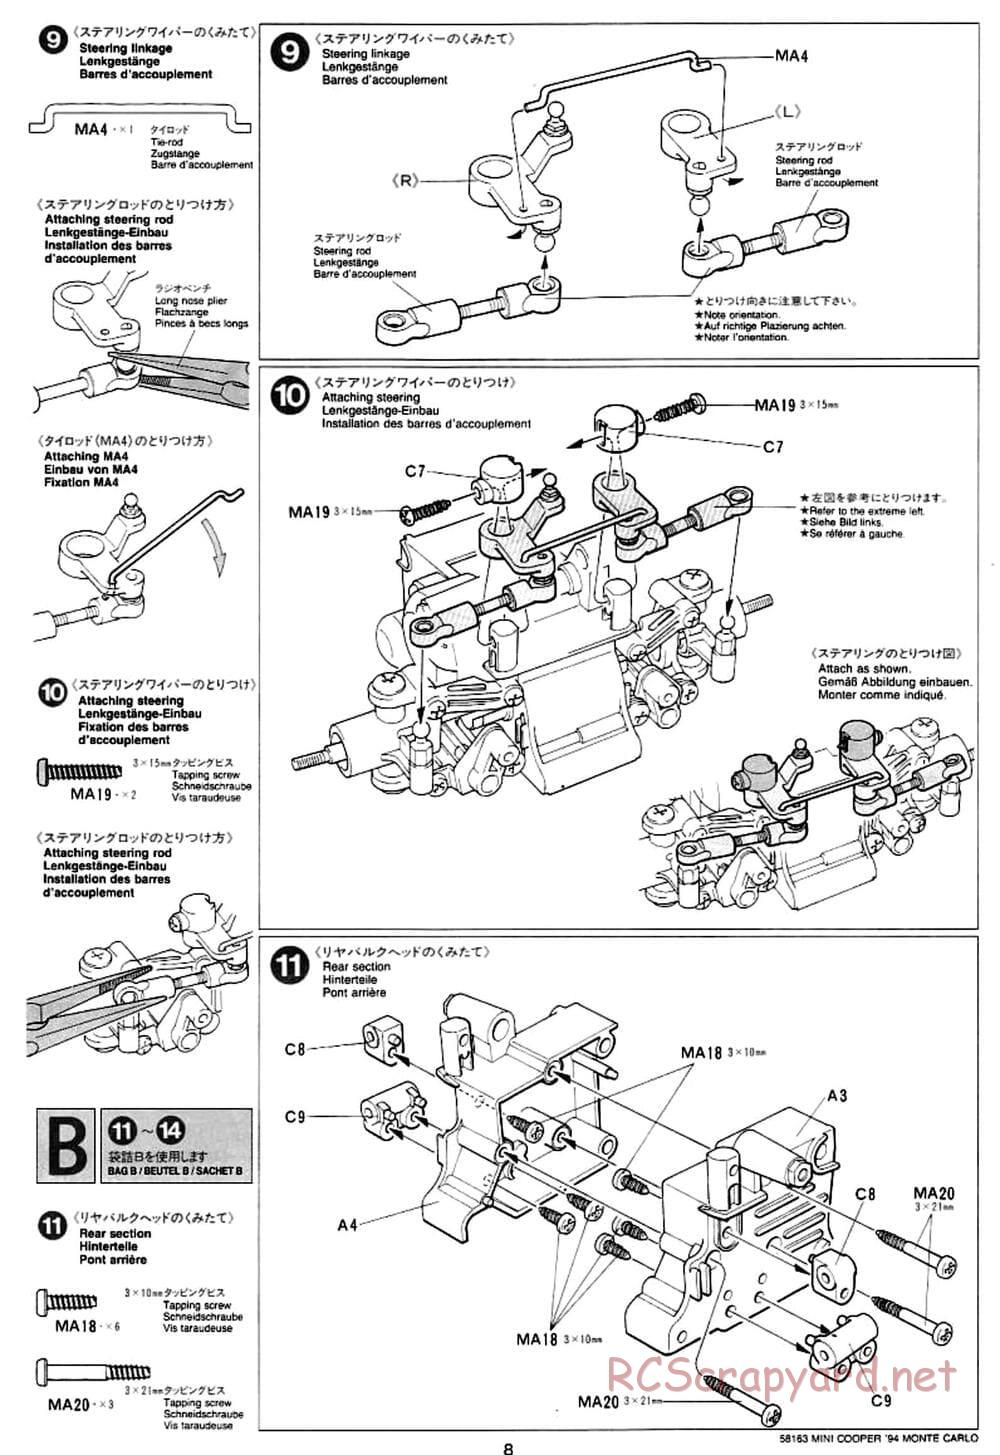 Tamiya - Rover Mini Cooper 94 Monte-Carlo - M01 Chassis - Manual - Page 8